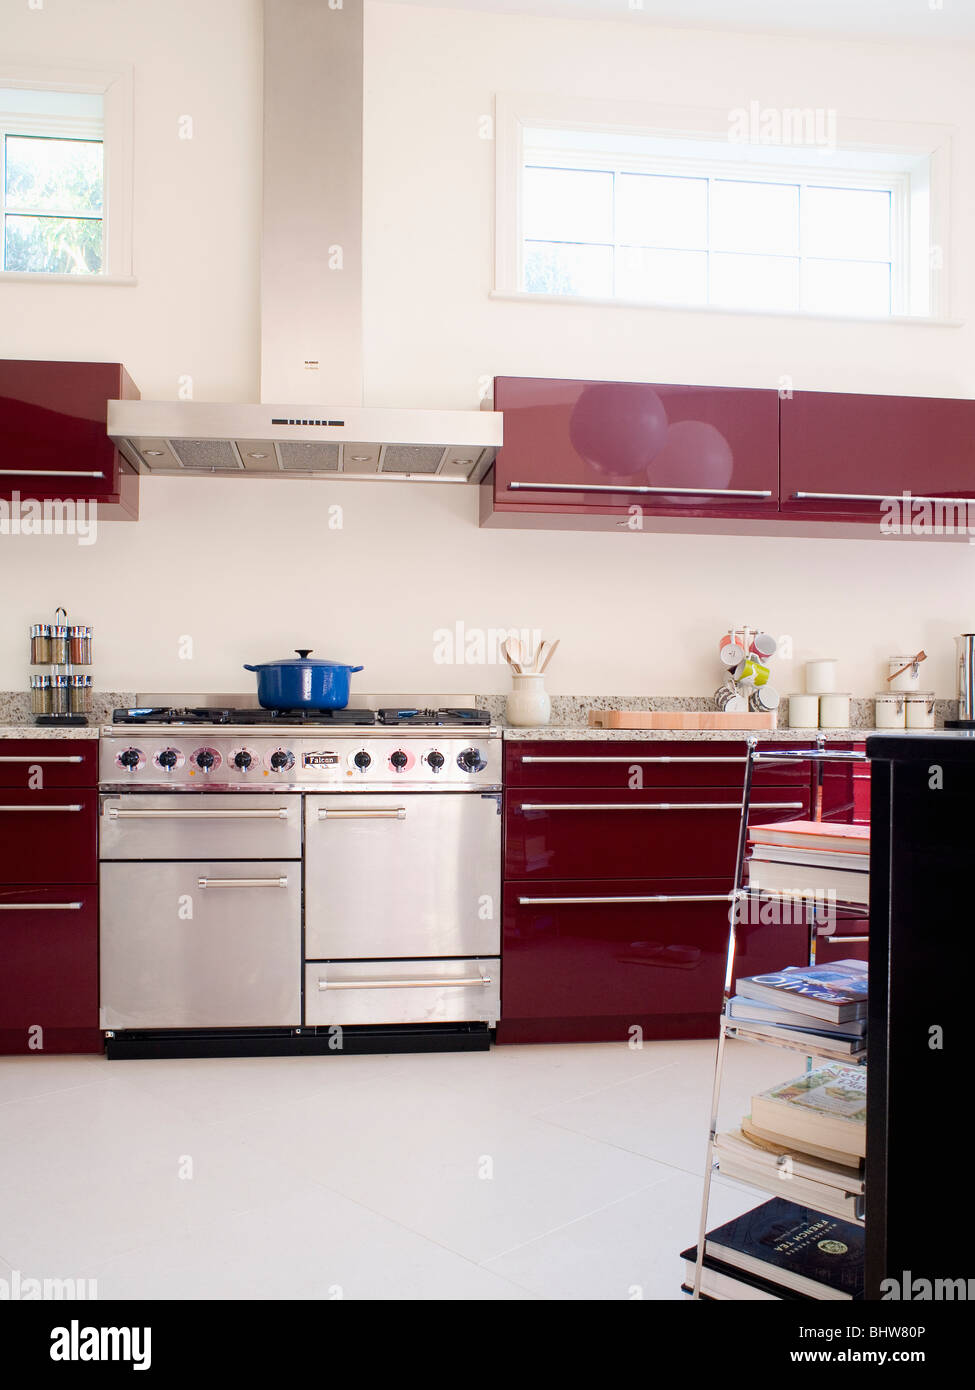 Stainless steel range oven in modern kitchen with white flooring and dark red wall-cupboards Stock Photo